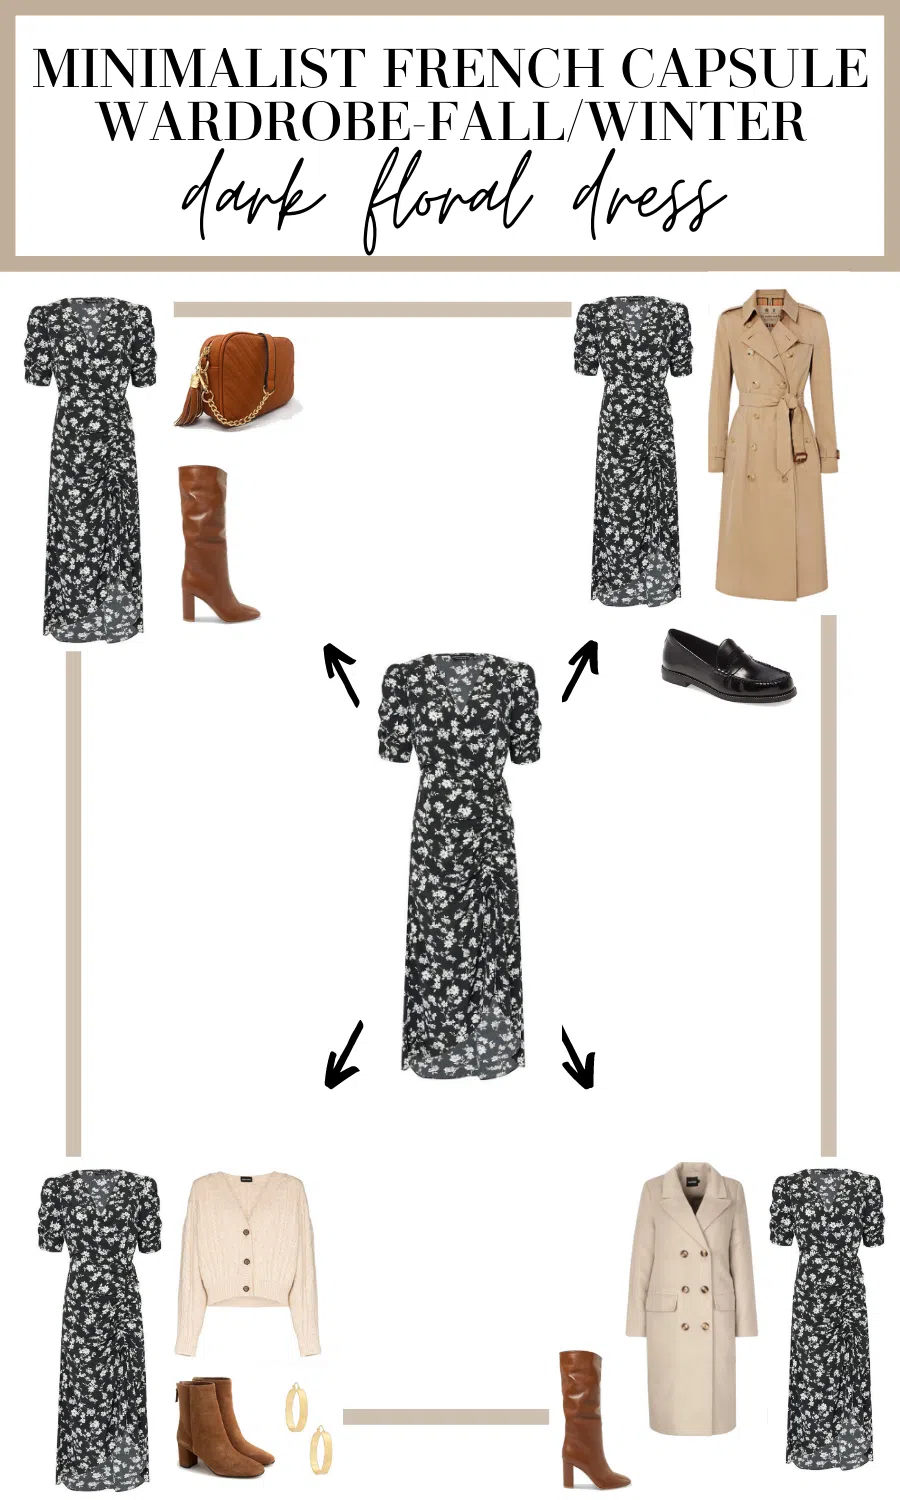 dark floral dress outfit ideas